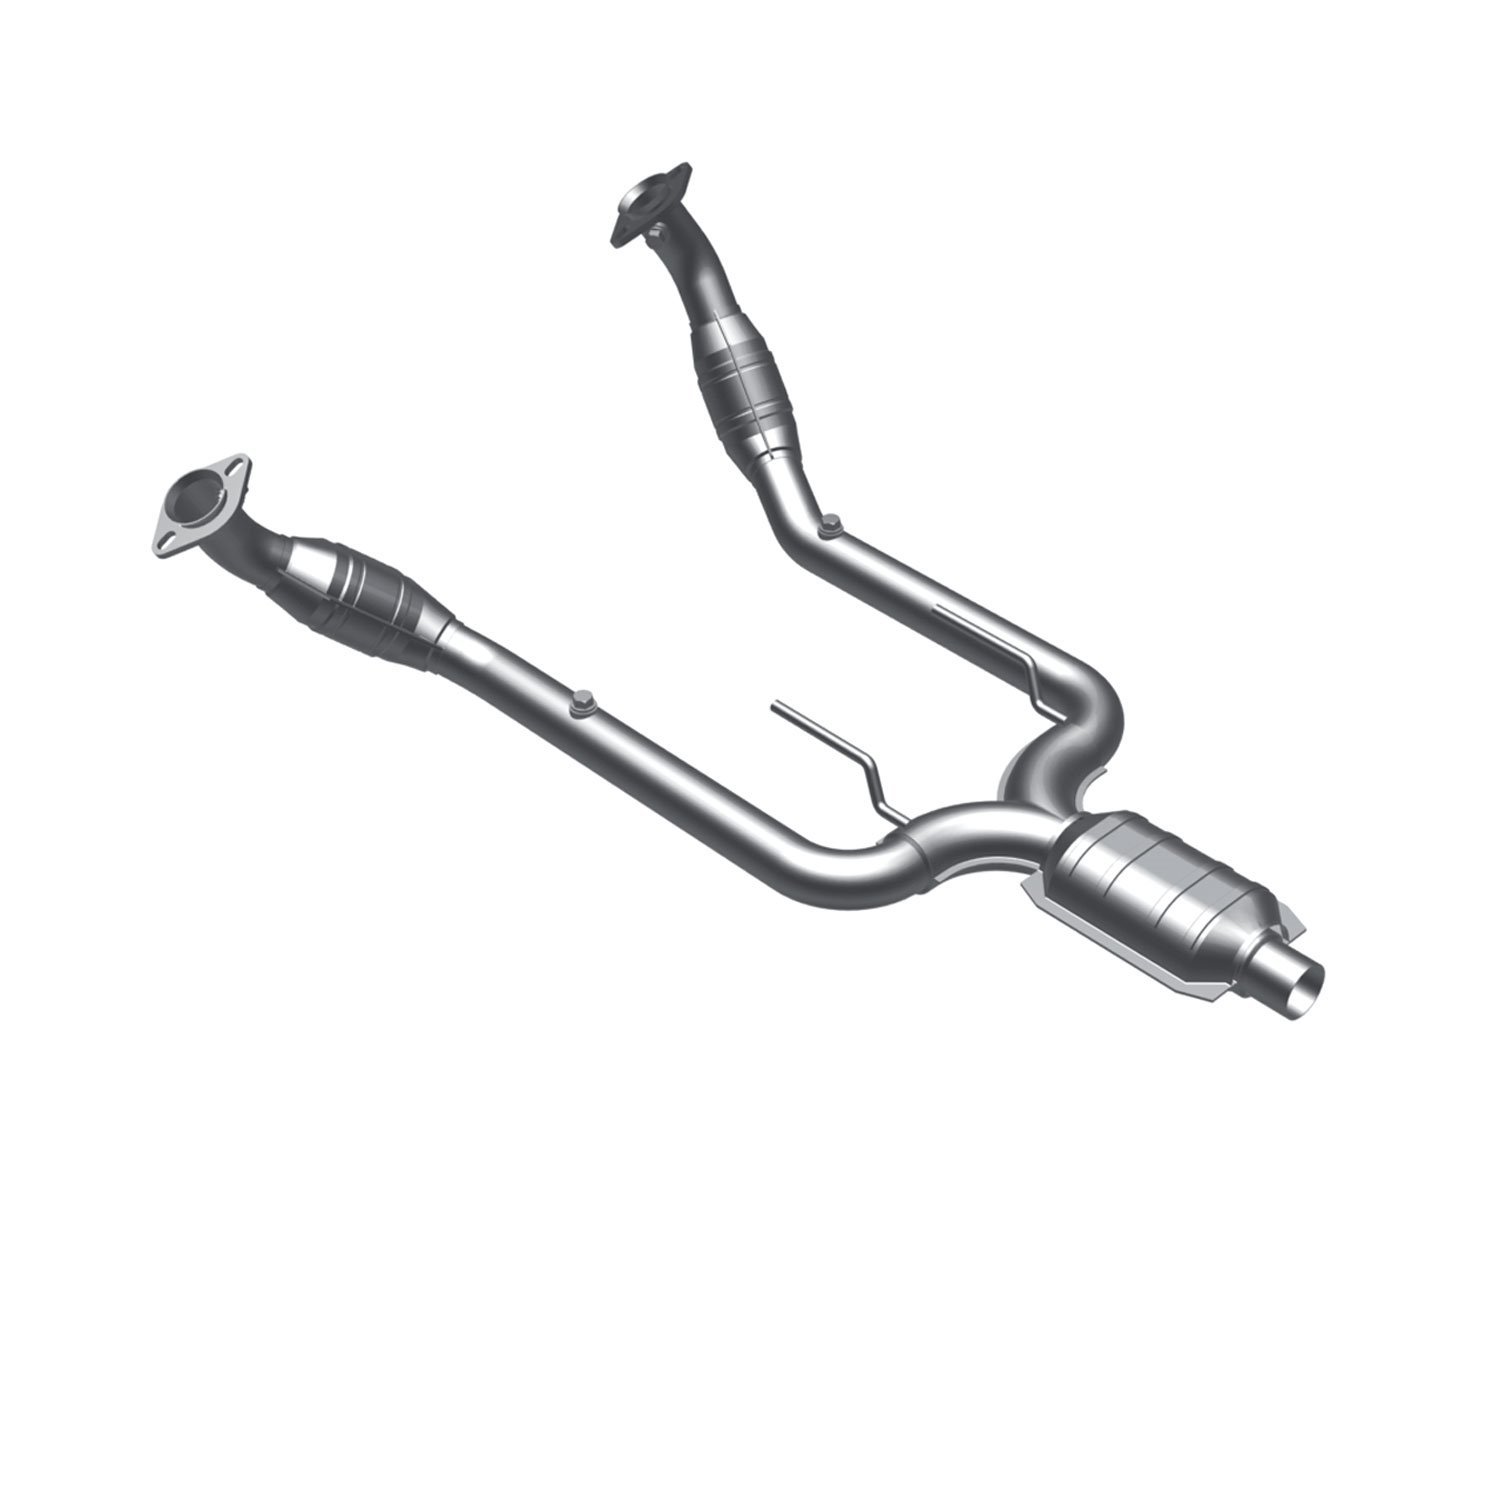 Direct-Fit Catalytic Converter 1994-97 Ford Thunderbird & Mercury Cougar 4.6L